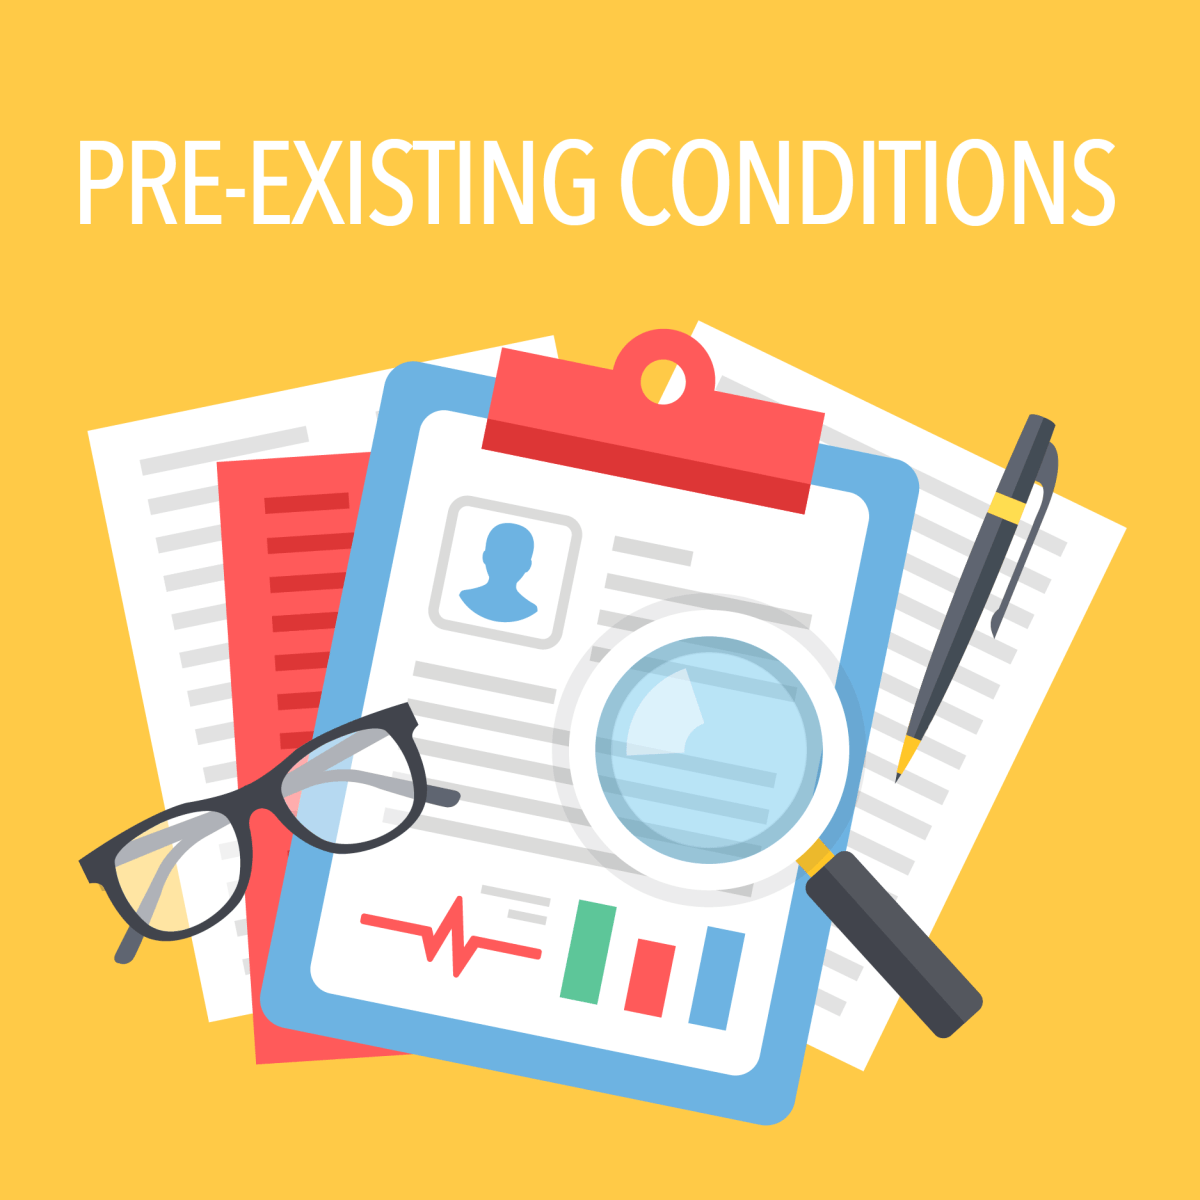 health insurance pre existing conditions, Guide to Exclusions in Health Insurance: Pre-Existing Conditions